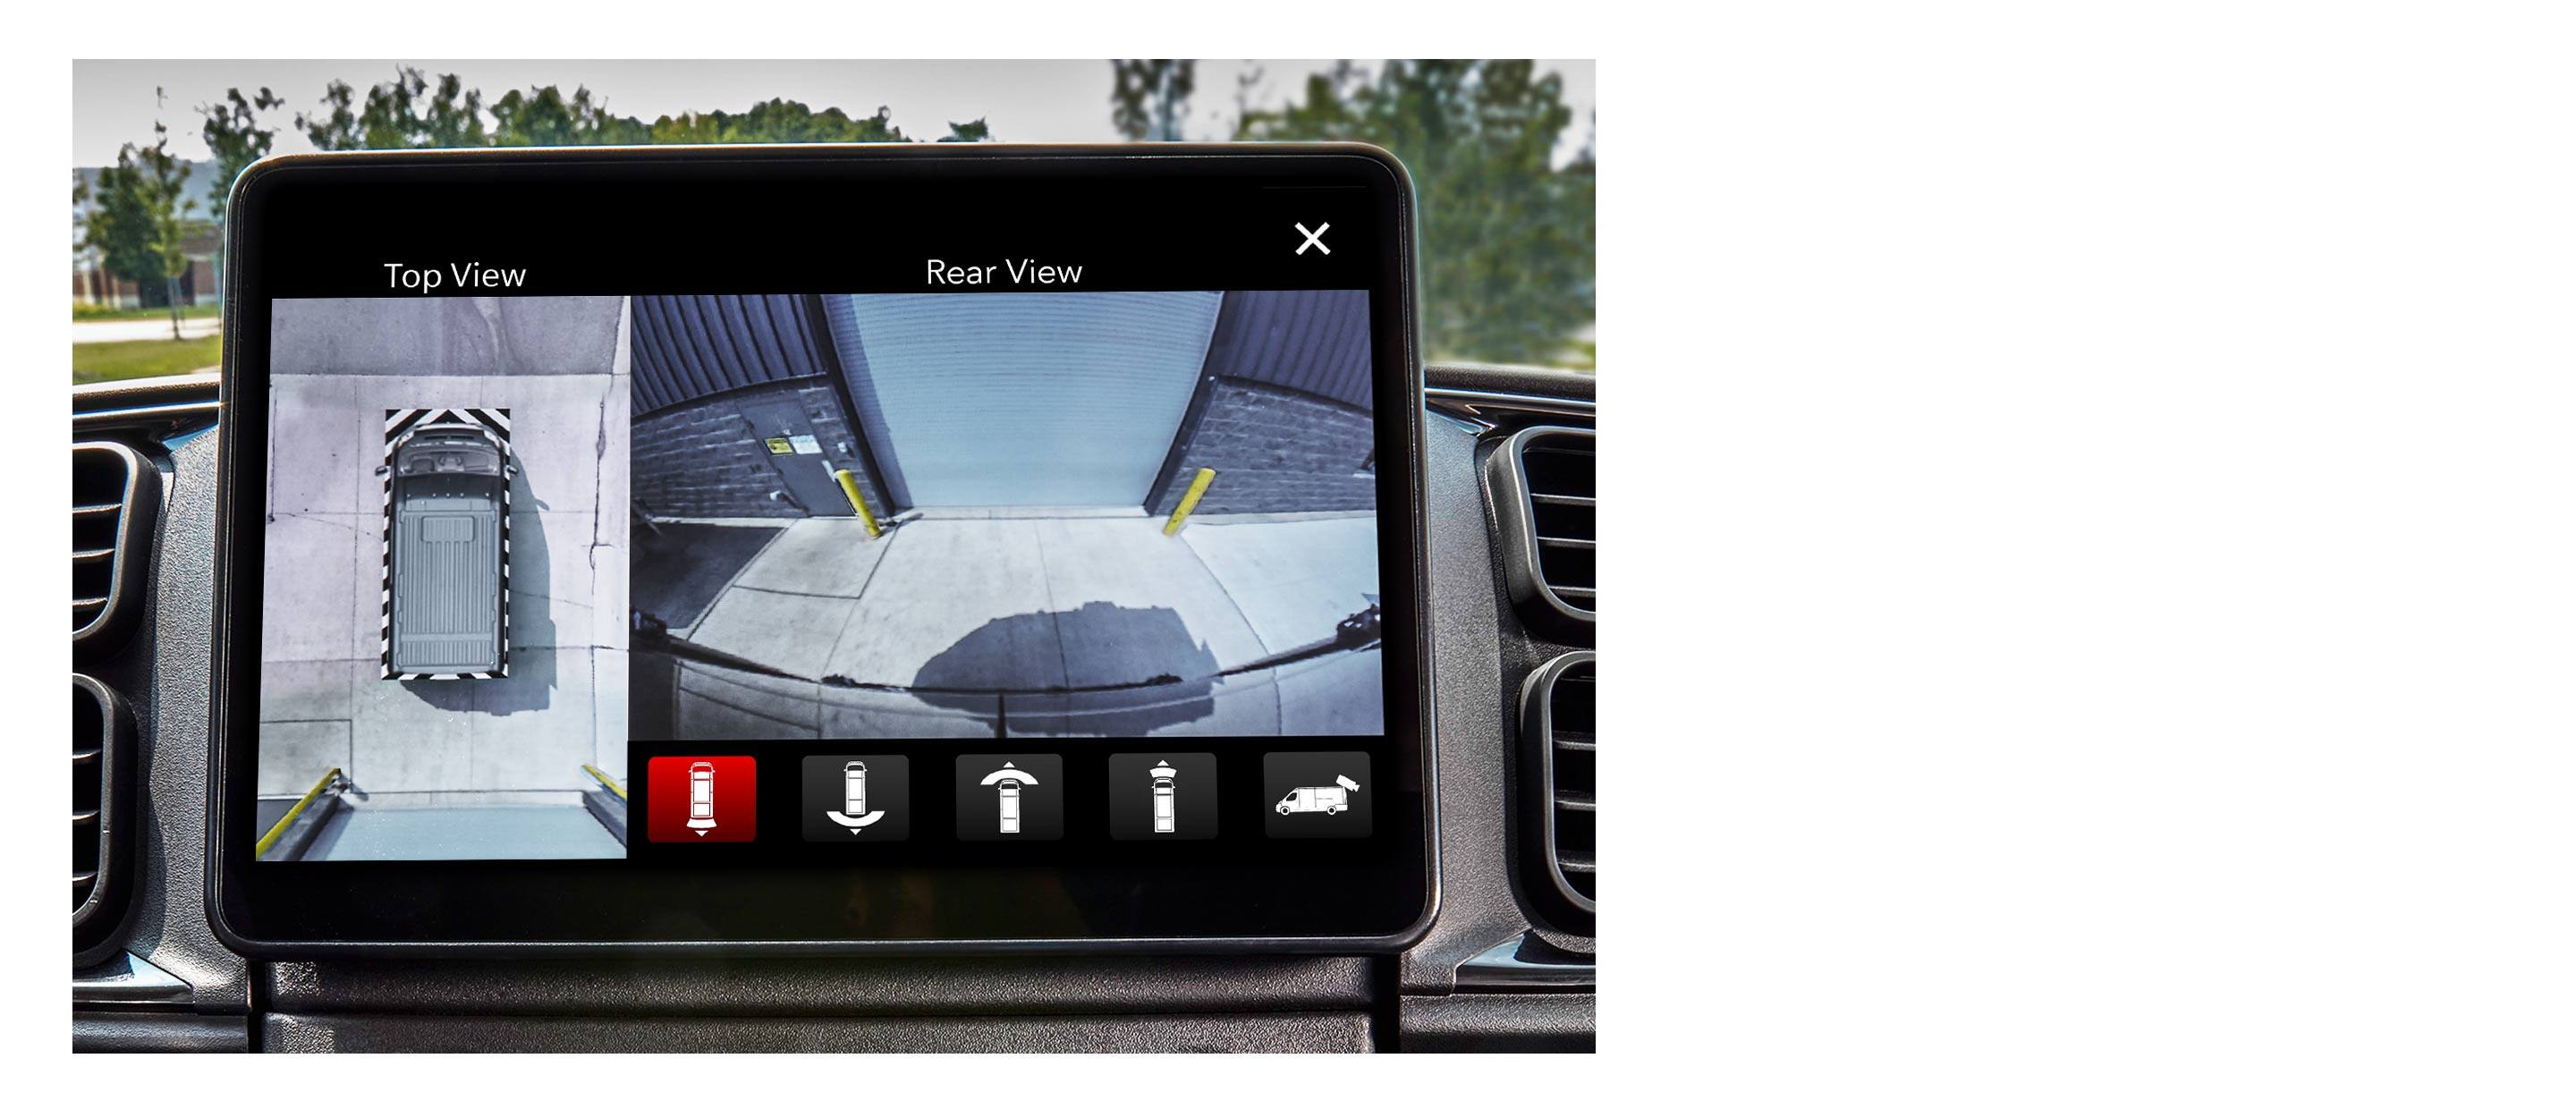 The Uconnect touchscreen in the 2022 Ram ProMaster showing a split screen with the top view and rear view of the van.